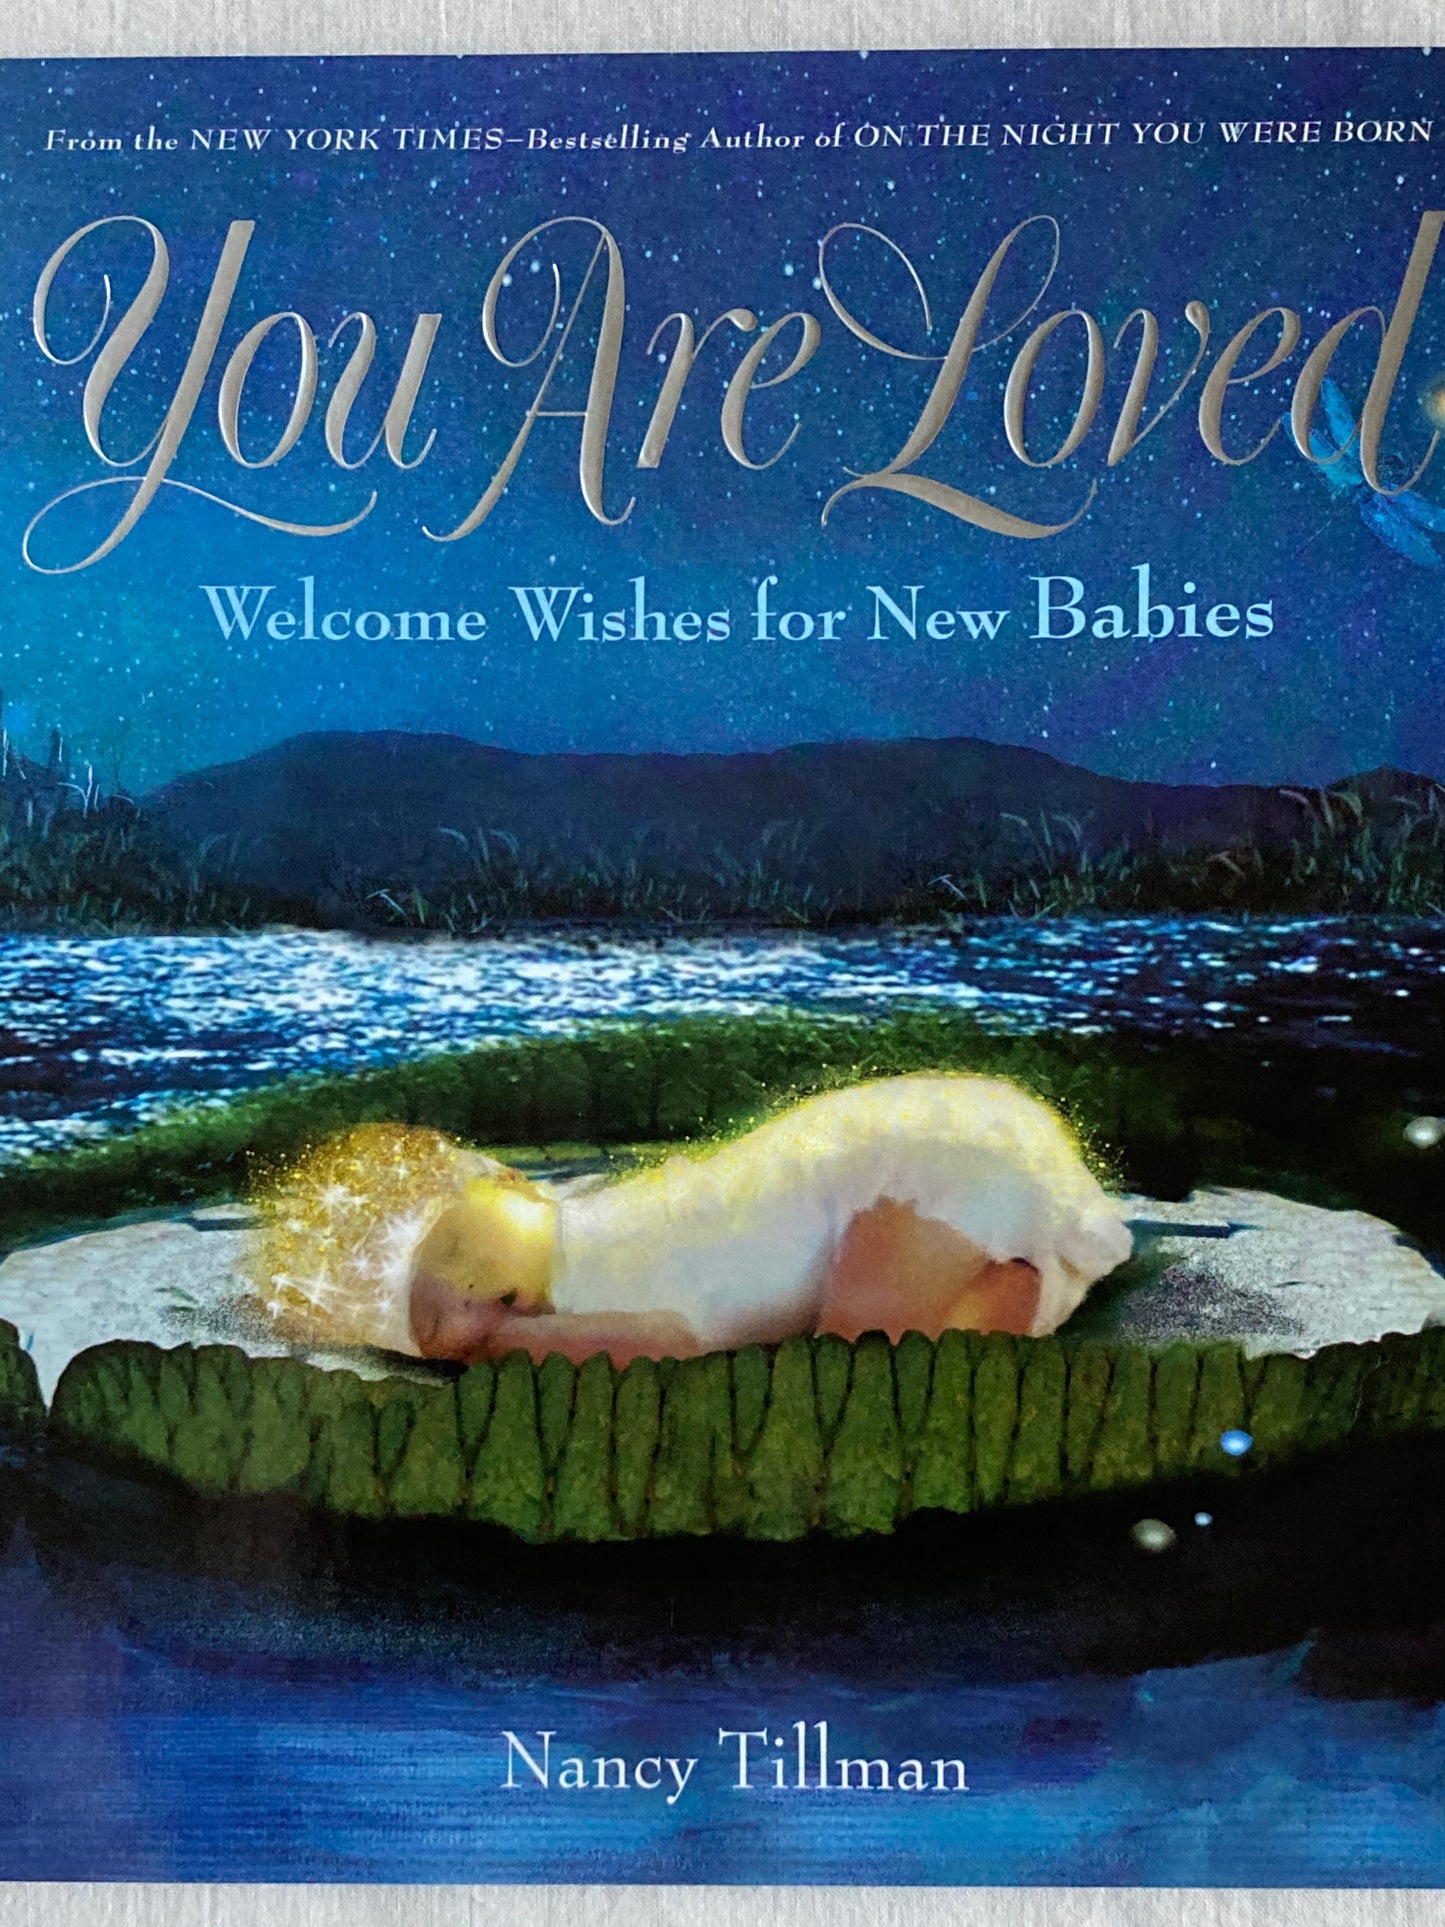 Baby Memory Book - YOU ARE LOVED